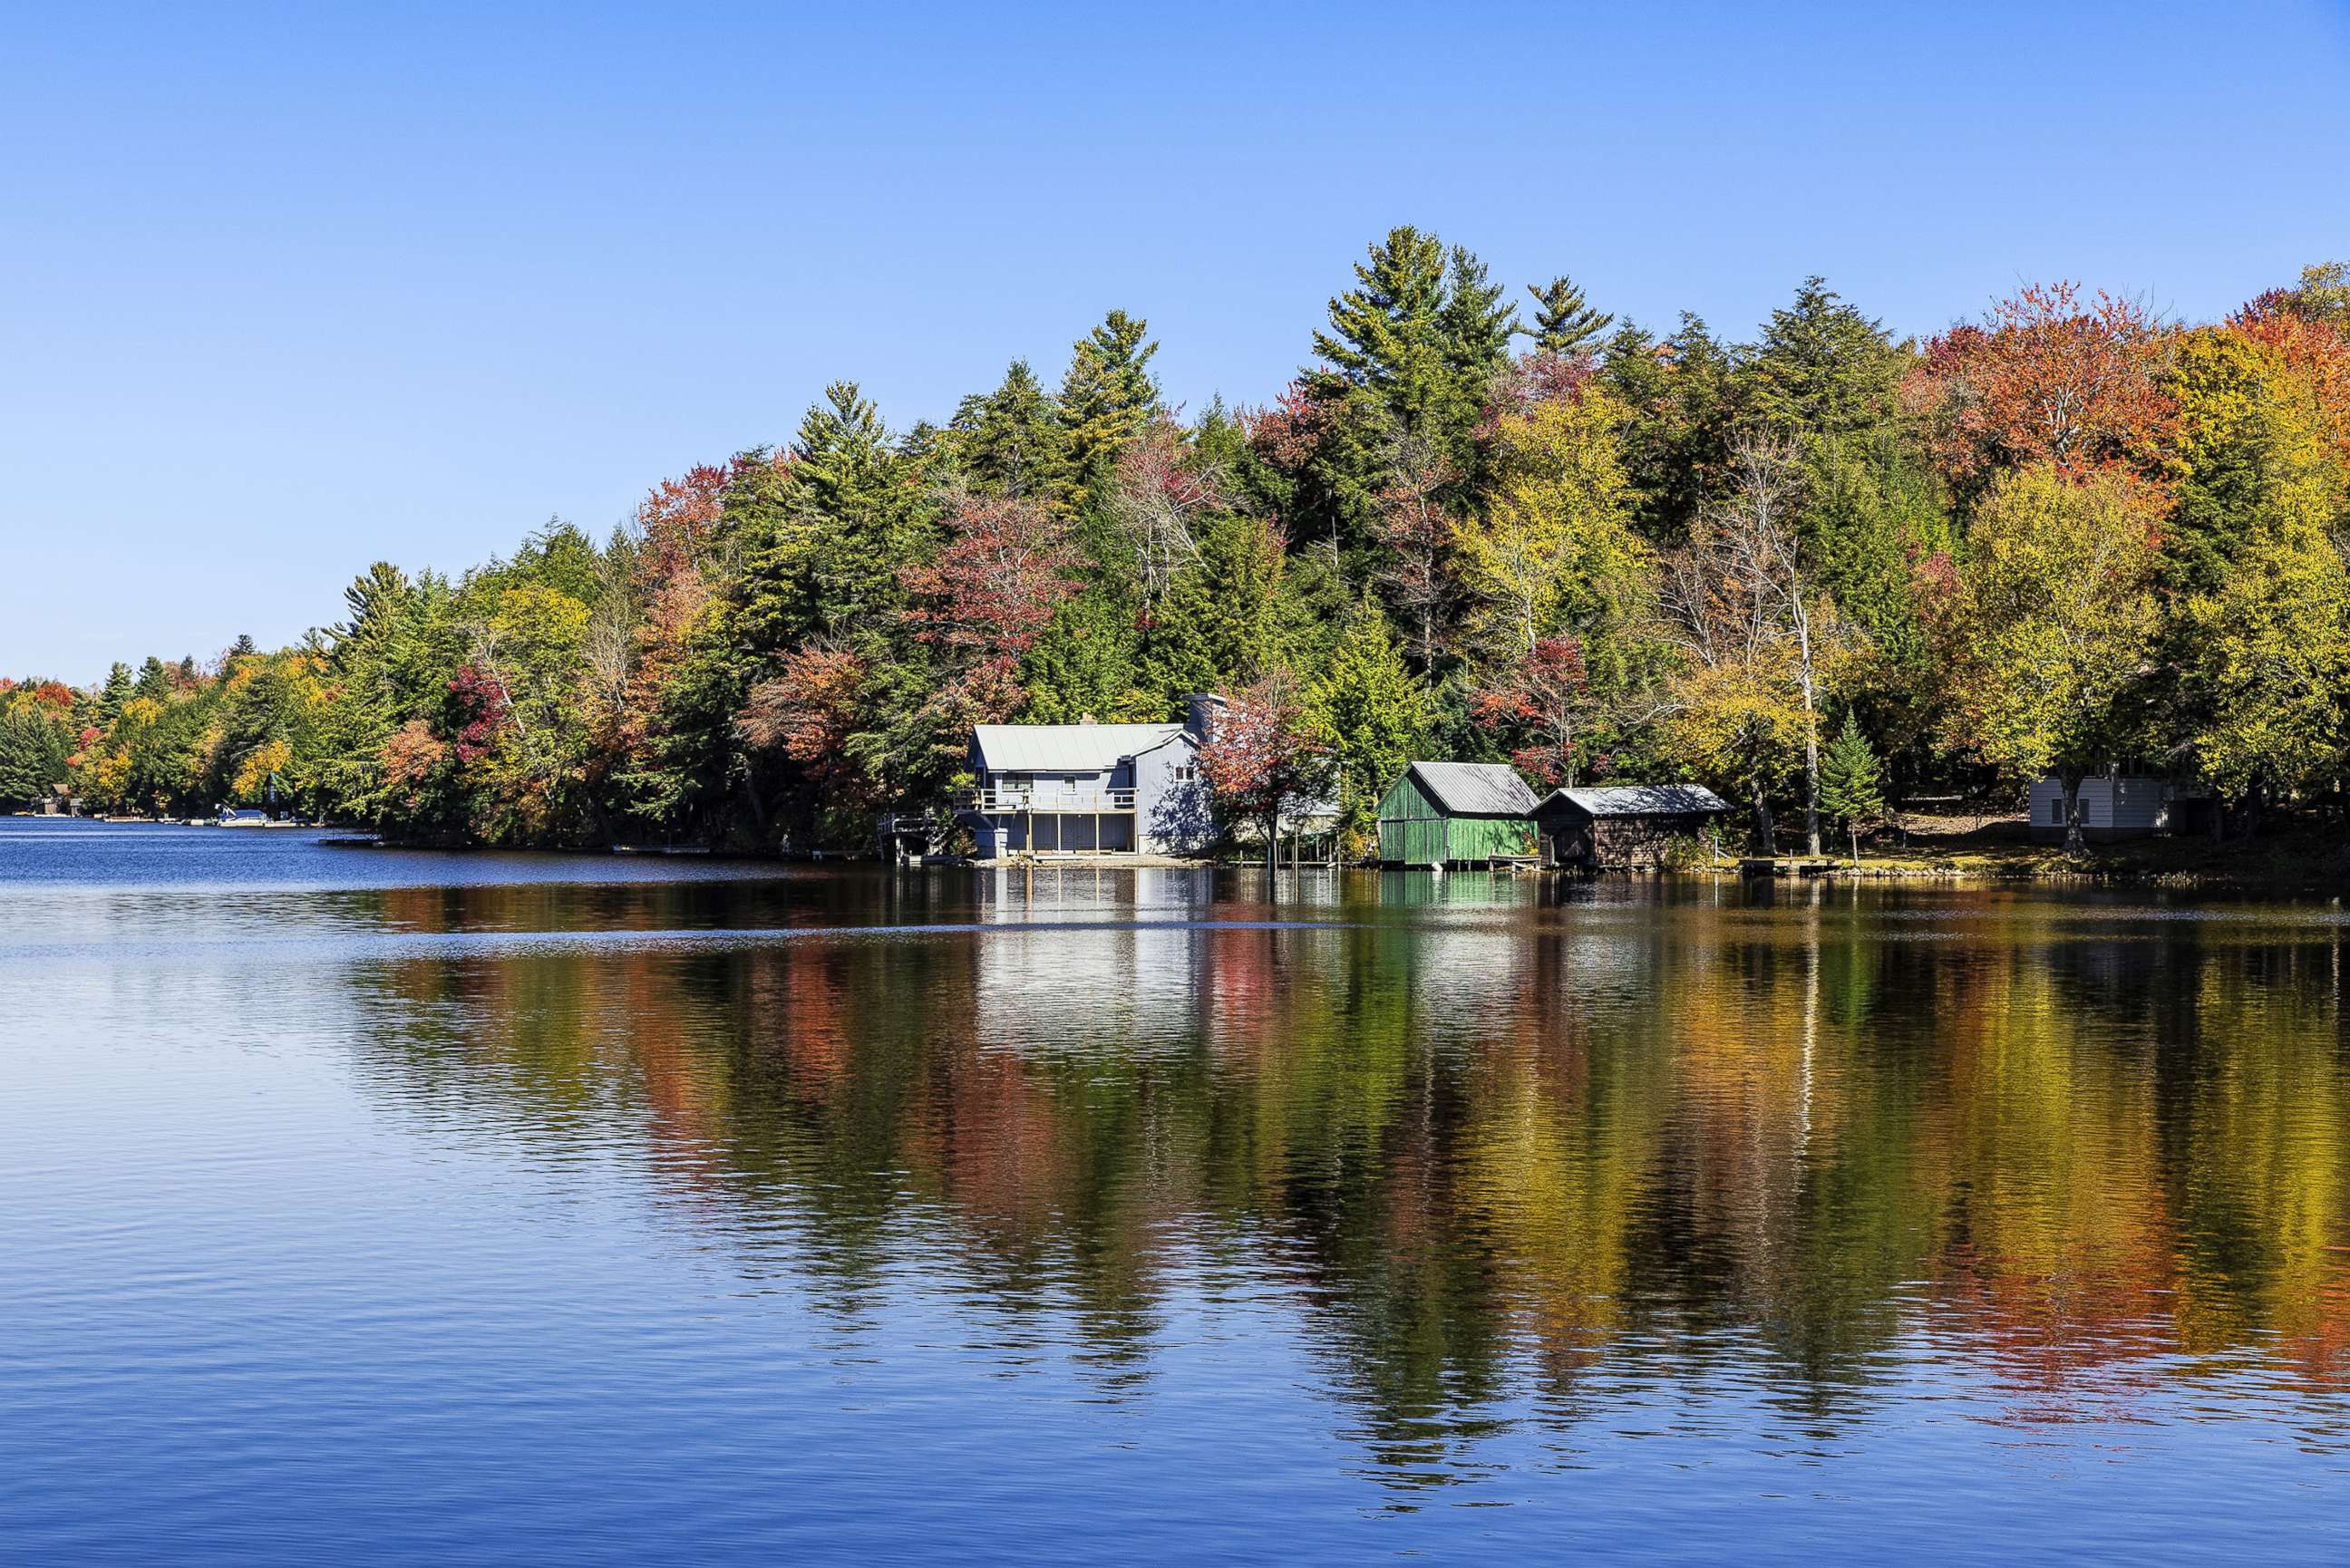 PHOTO: A lake house on Long Lake in upstate New York, Oct. 12, 2016.